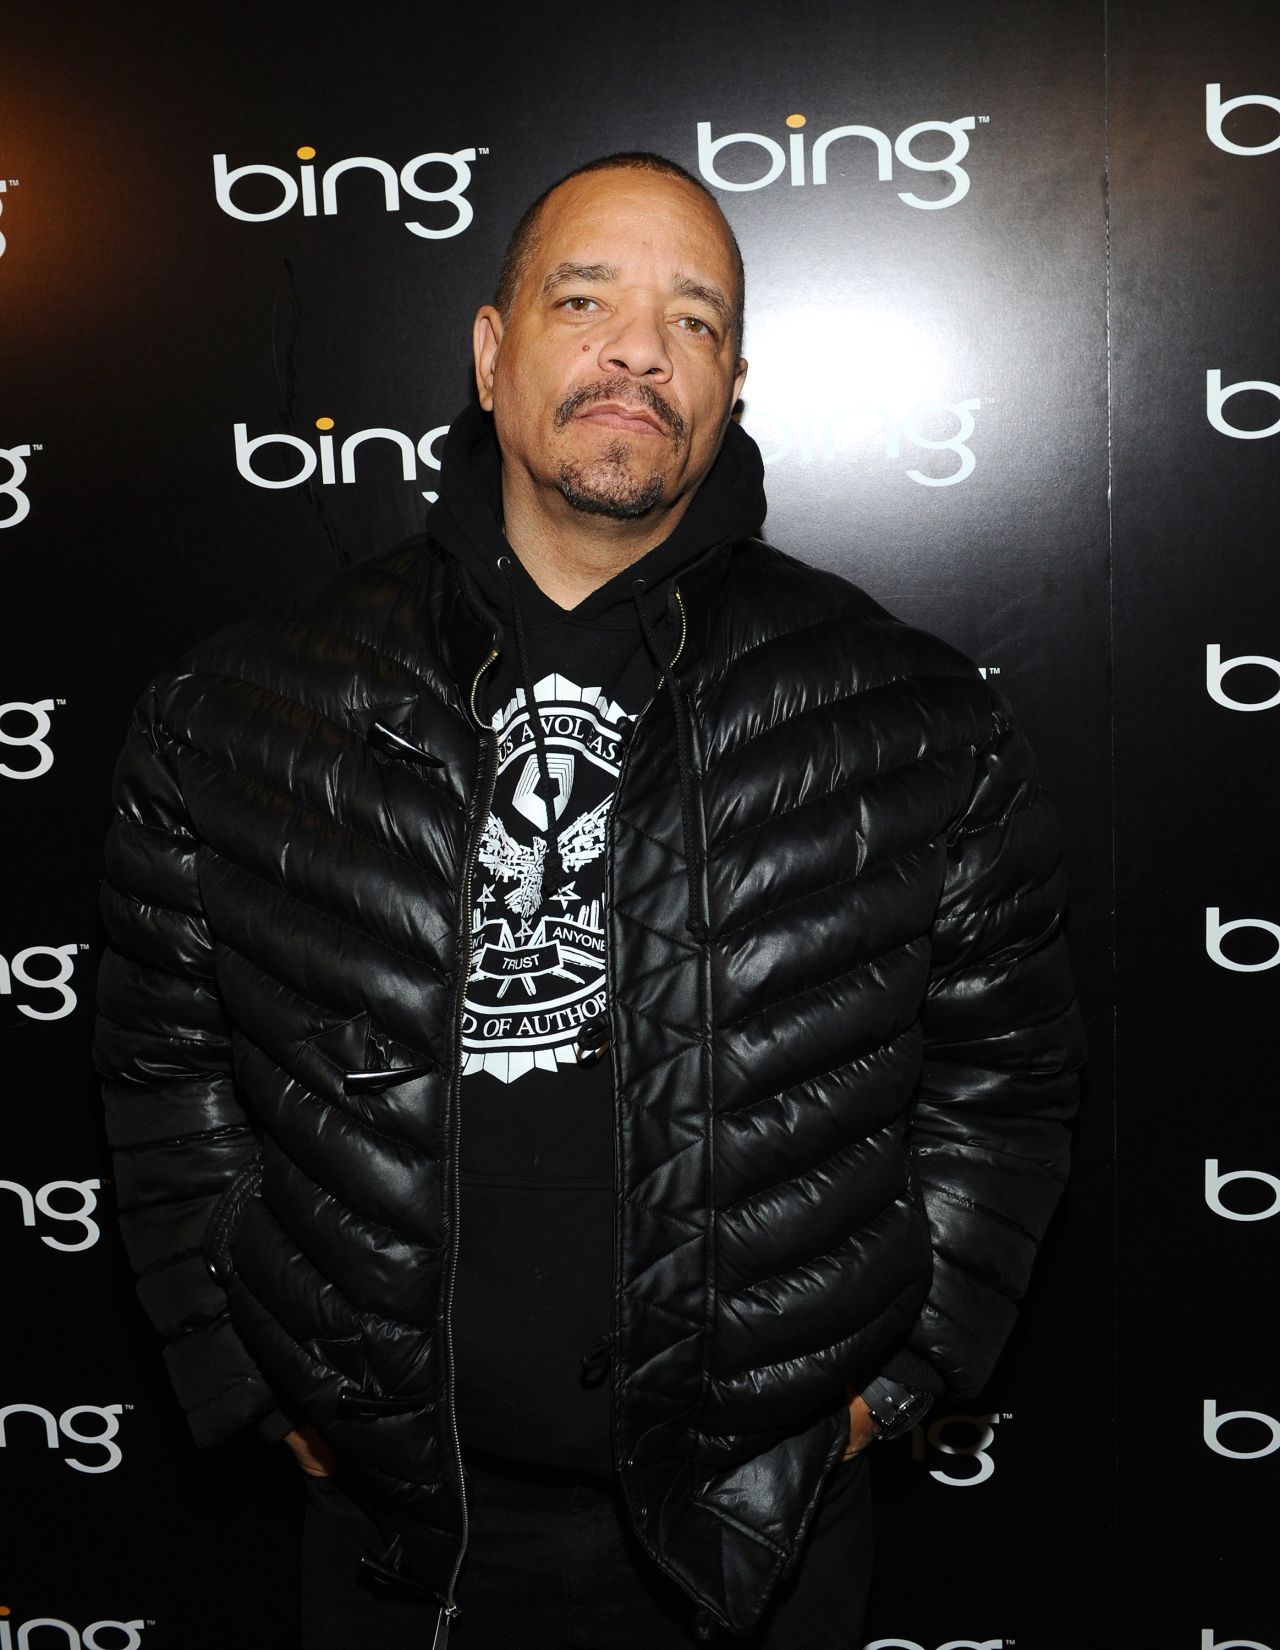 Before he was an actor, Ice T was a rapper and also performed with the heavy metal band Body Count. In 1992 their collaboration on the song<a href="http://www.youtube.com/watch?v=7kakUJARSOc" target="_blank" target="_blank"> "Cop Killer" </a>drew criticism from then-President George Bush.